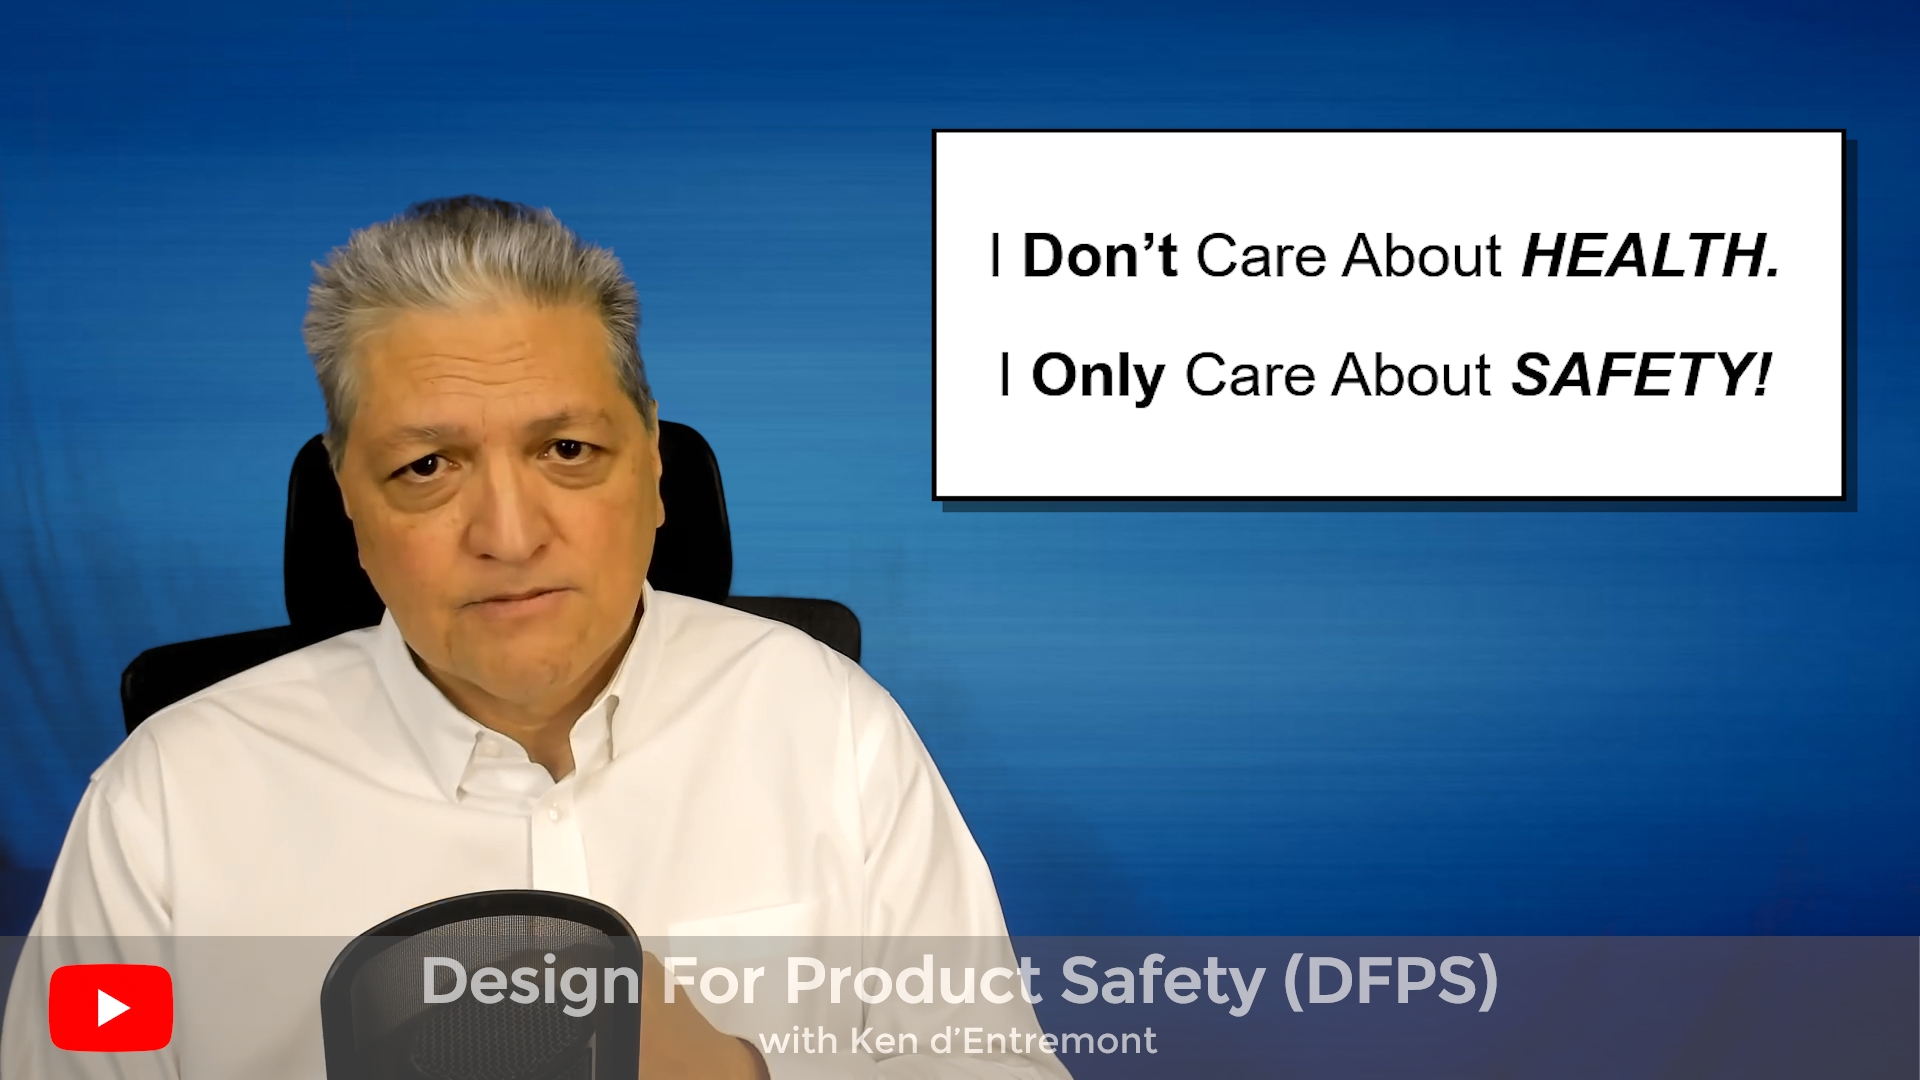 “Design For Product Safety with Ken d’Entremont”–Video 3: I Don’t Care About HEALTH, I Only Care About SAFETY!